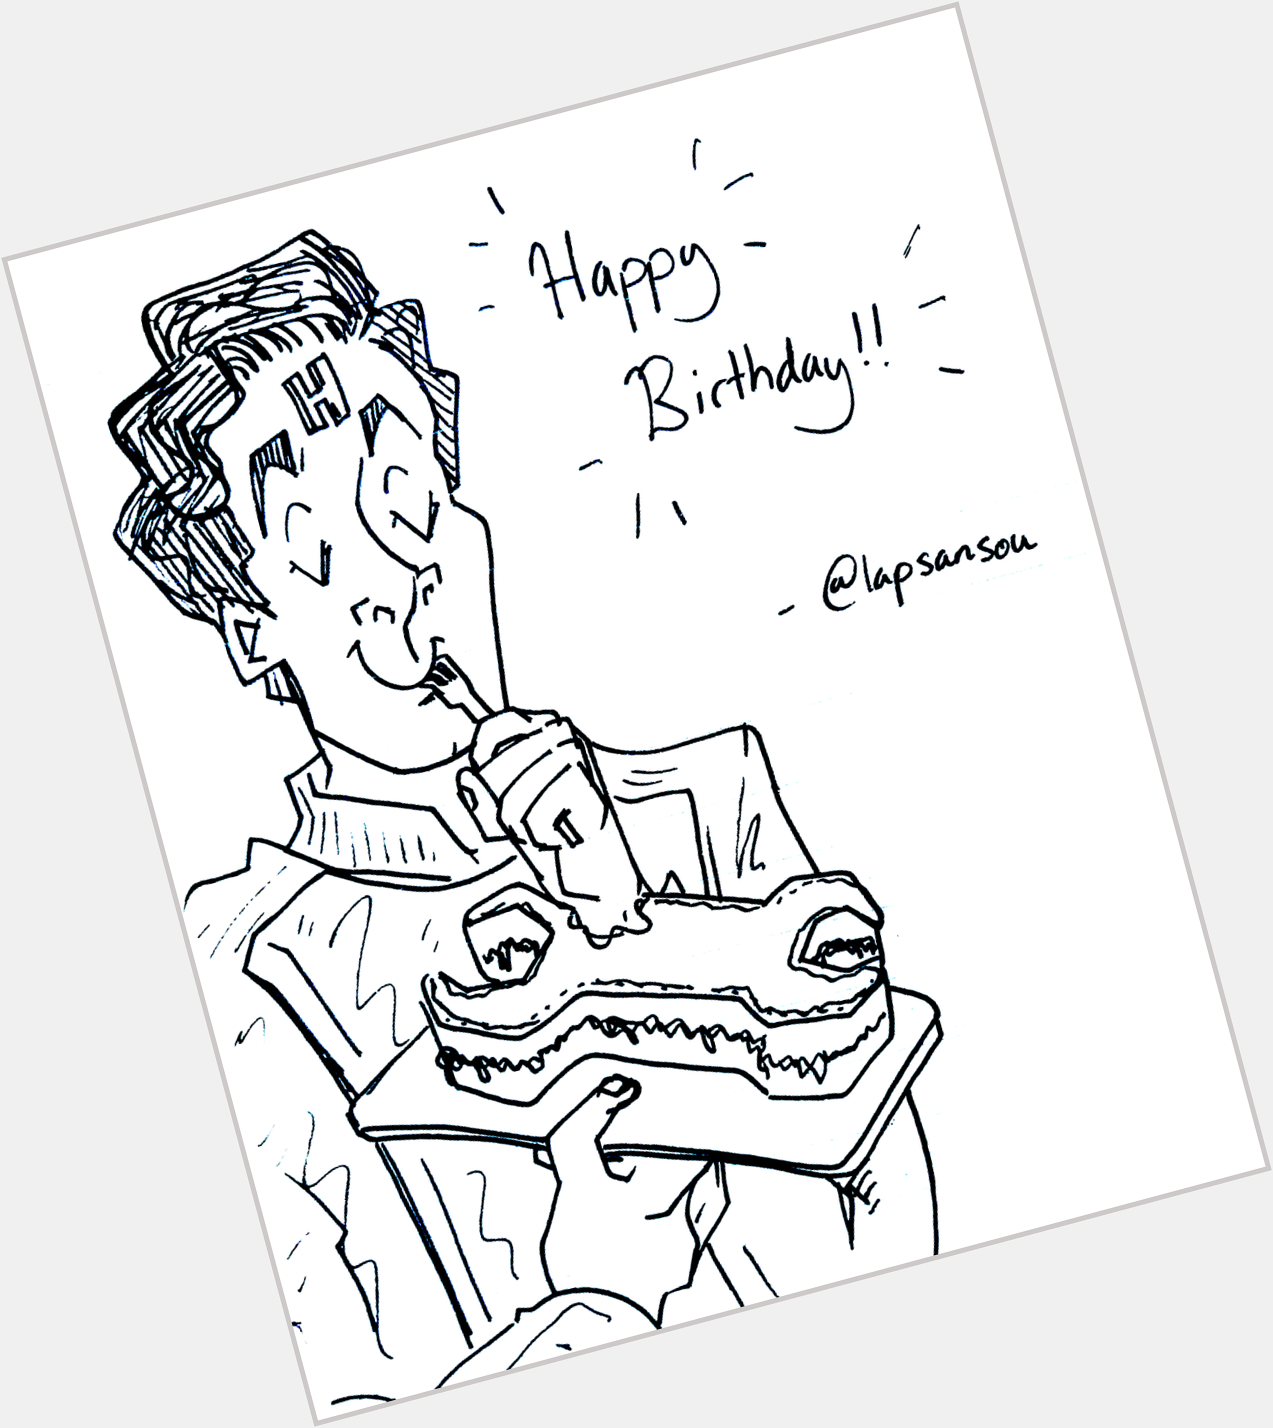  Just a swift little doodle to say Happy Birthday, Chris Barrie!! May there be much cake and rejoicing. 